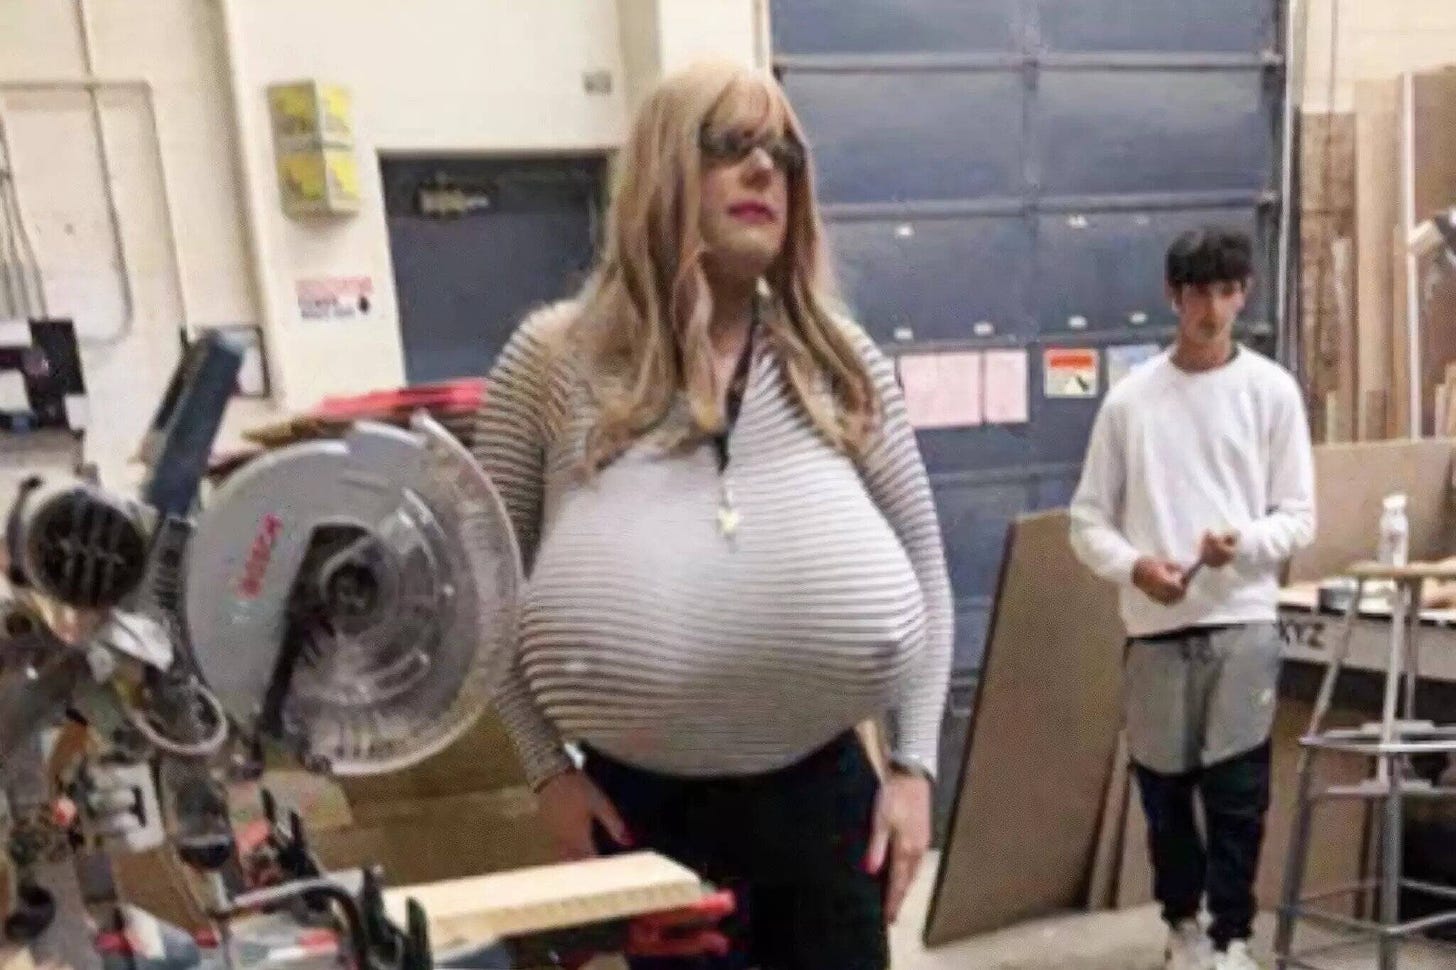 Students warned not to take photos of Oakville teacher who wears huge  prosthetic breasts